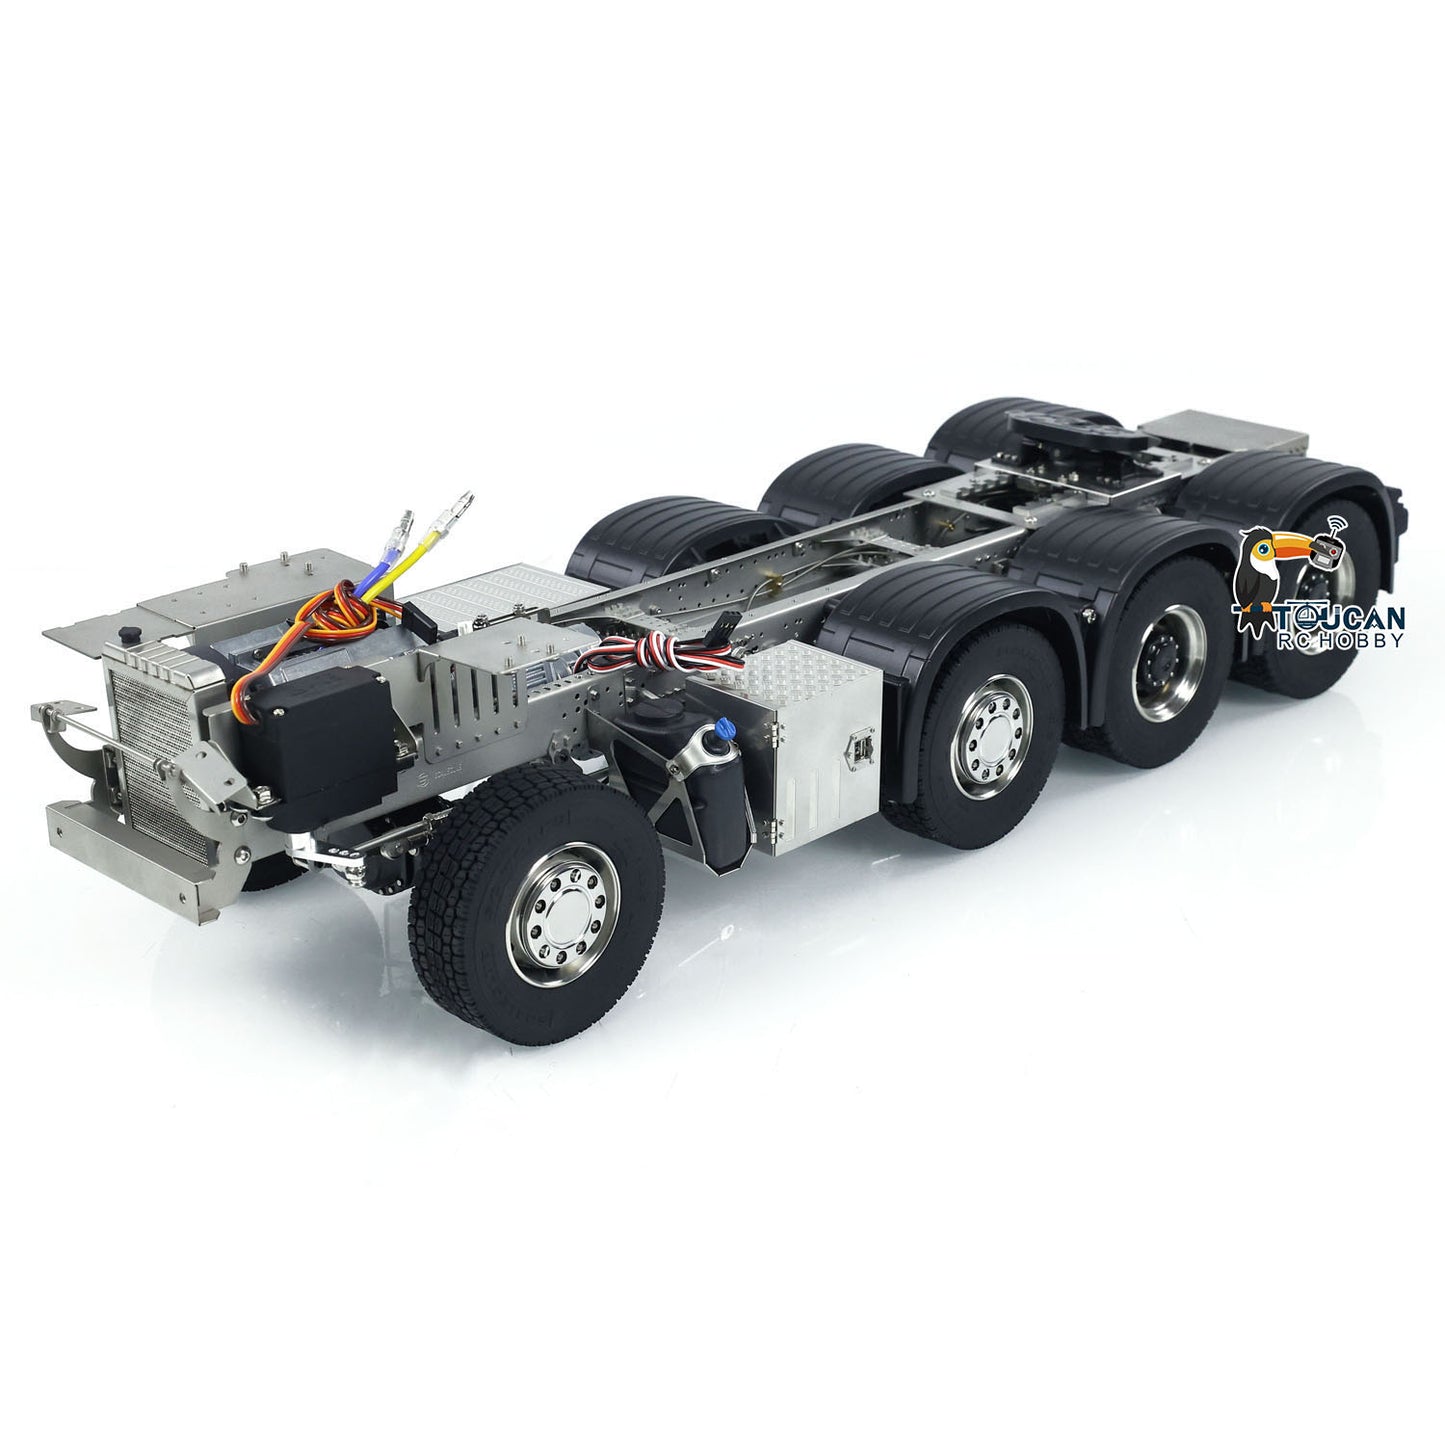 1/14 8x8 Metal Chassis for RC Tractor Remote Controlled Truck 3363 Car Simulation Model 3 Speeds Transmission Assembled ESC